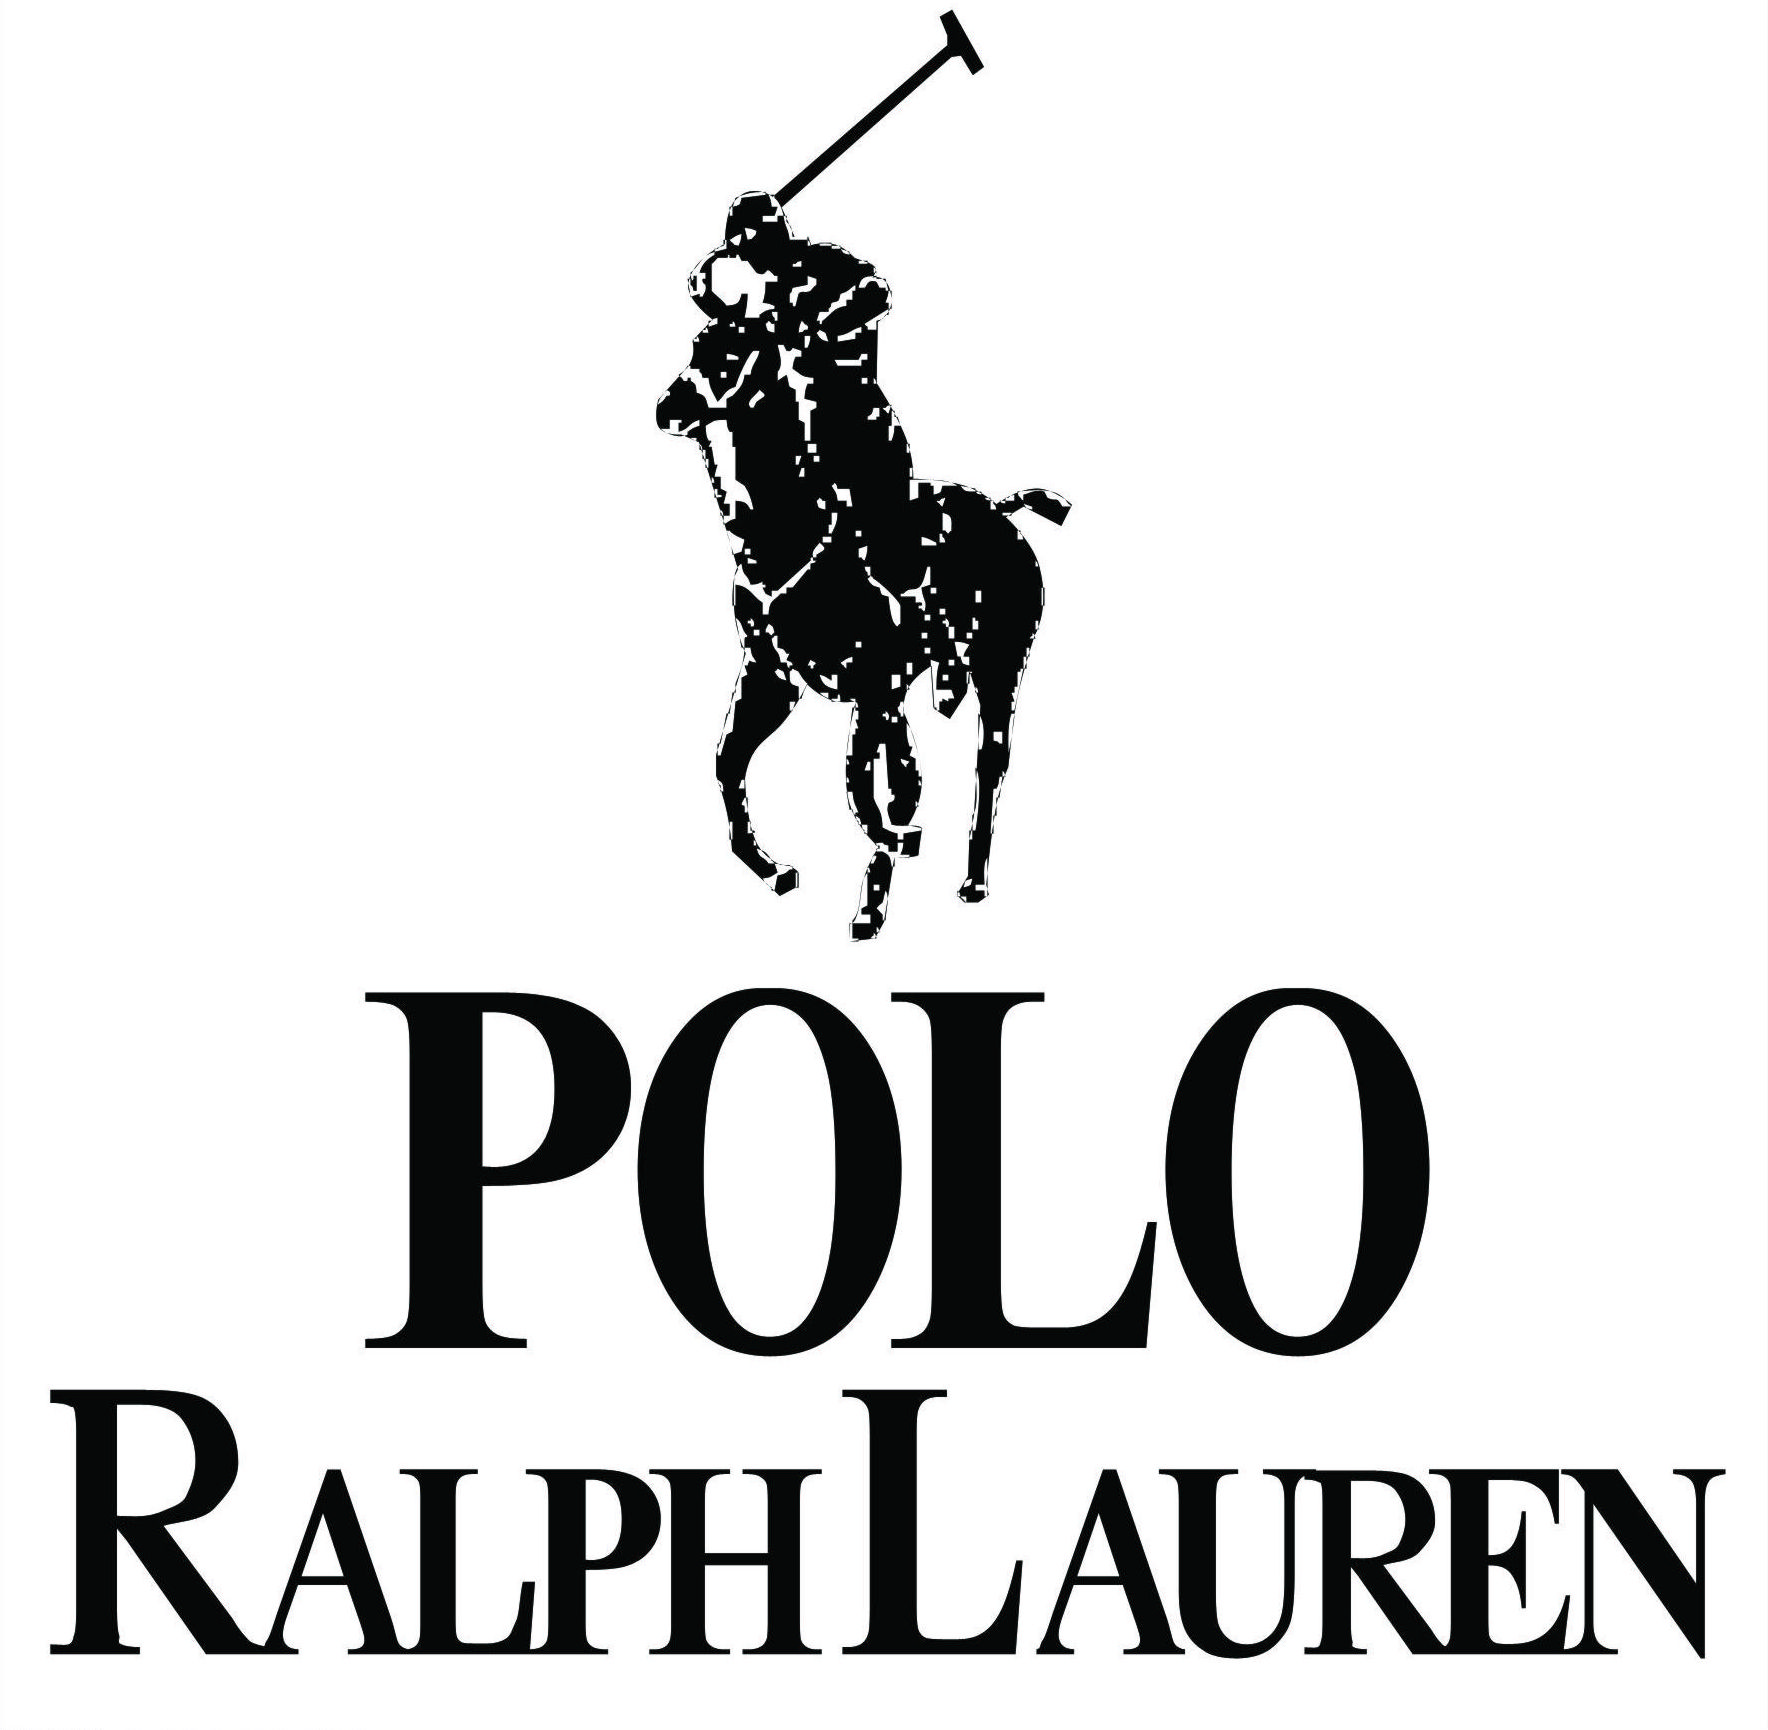 Ralph Lauren: Reinventing a classic, the pinnacle of elegance and quality in fashion.